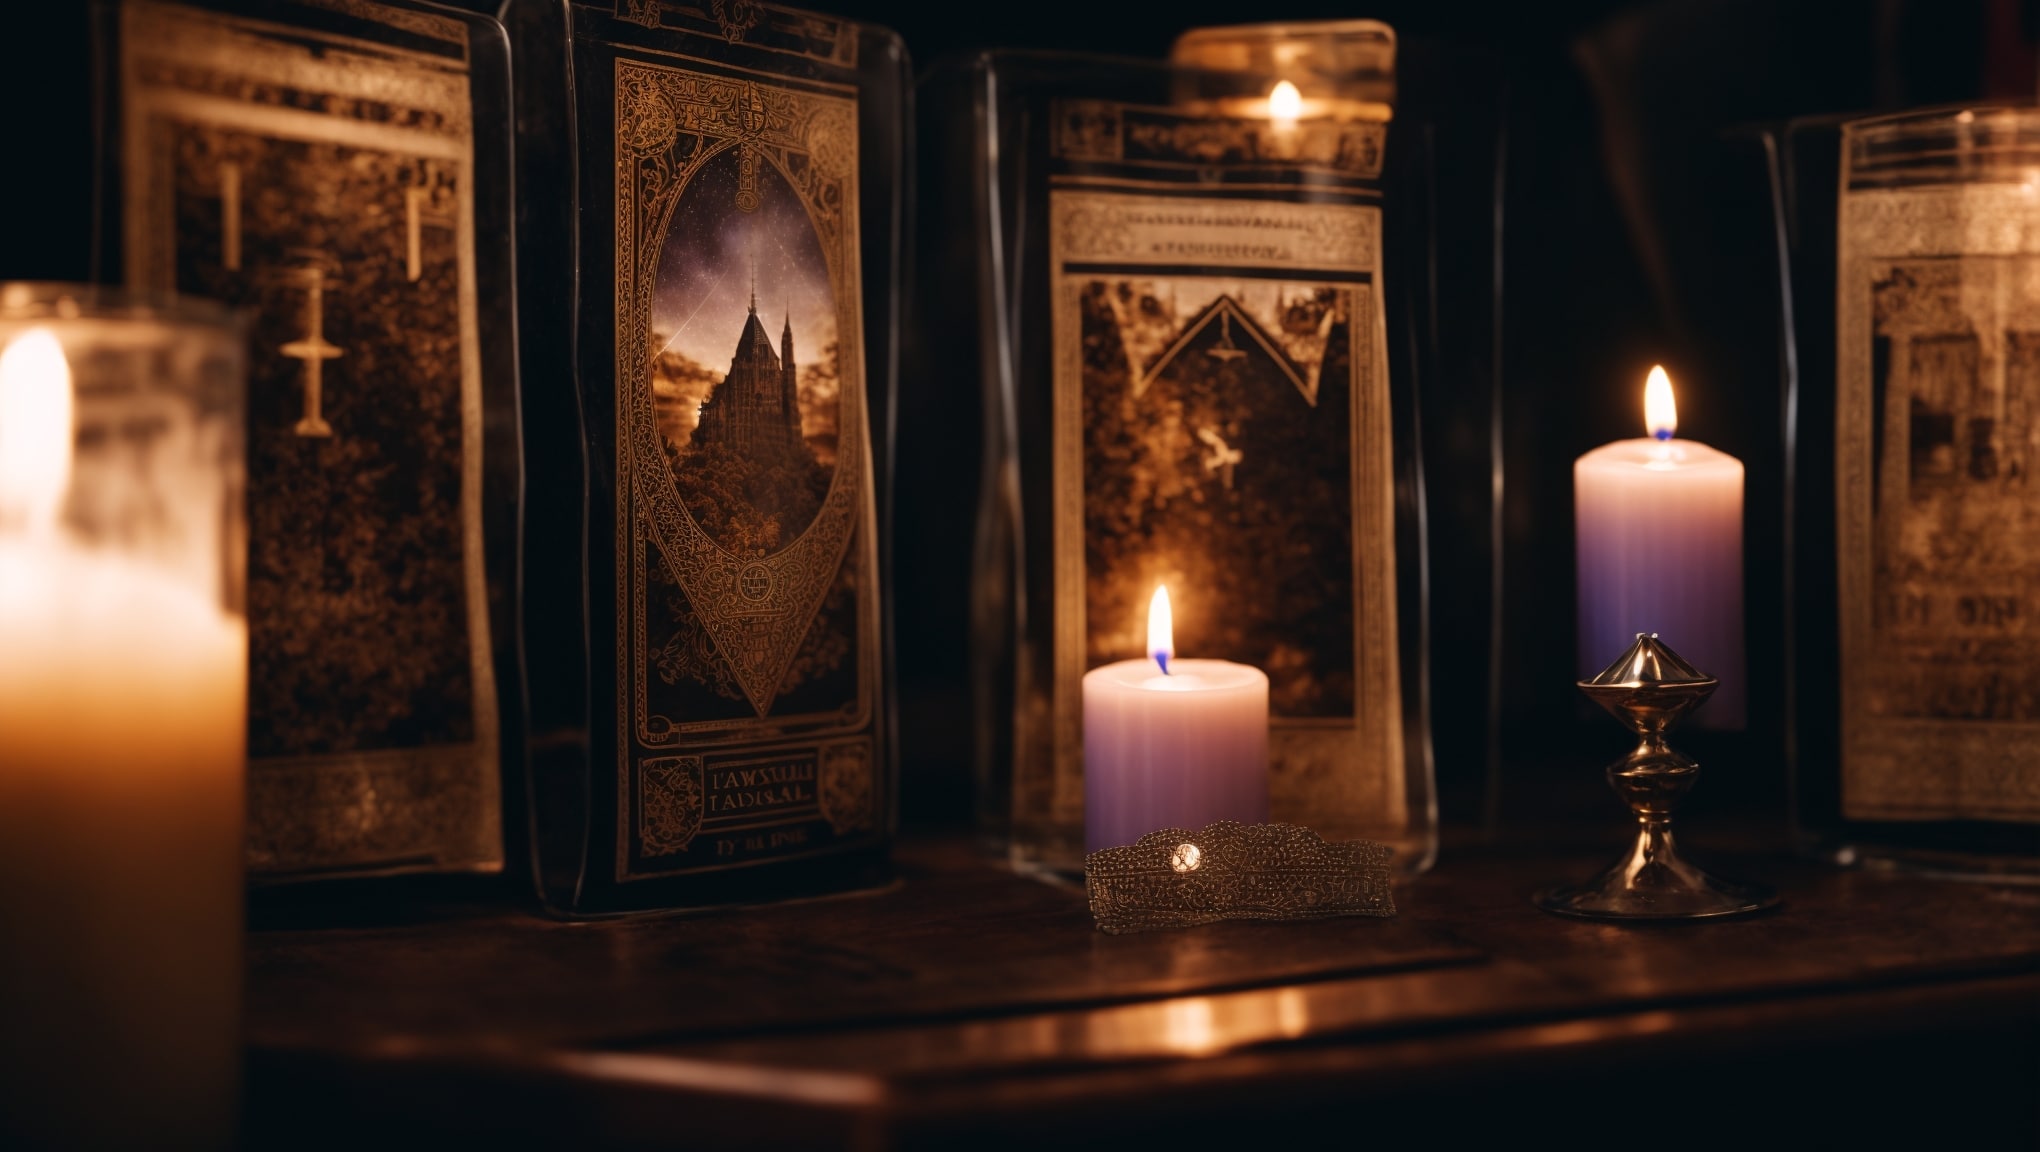 Five upside-down tarot cards with a crystal ball and candles in the background, symbolizing the interpretation of tarot card reversals.